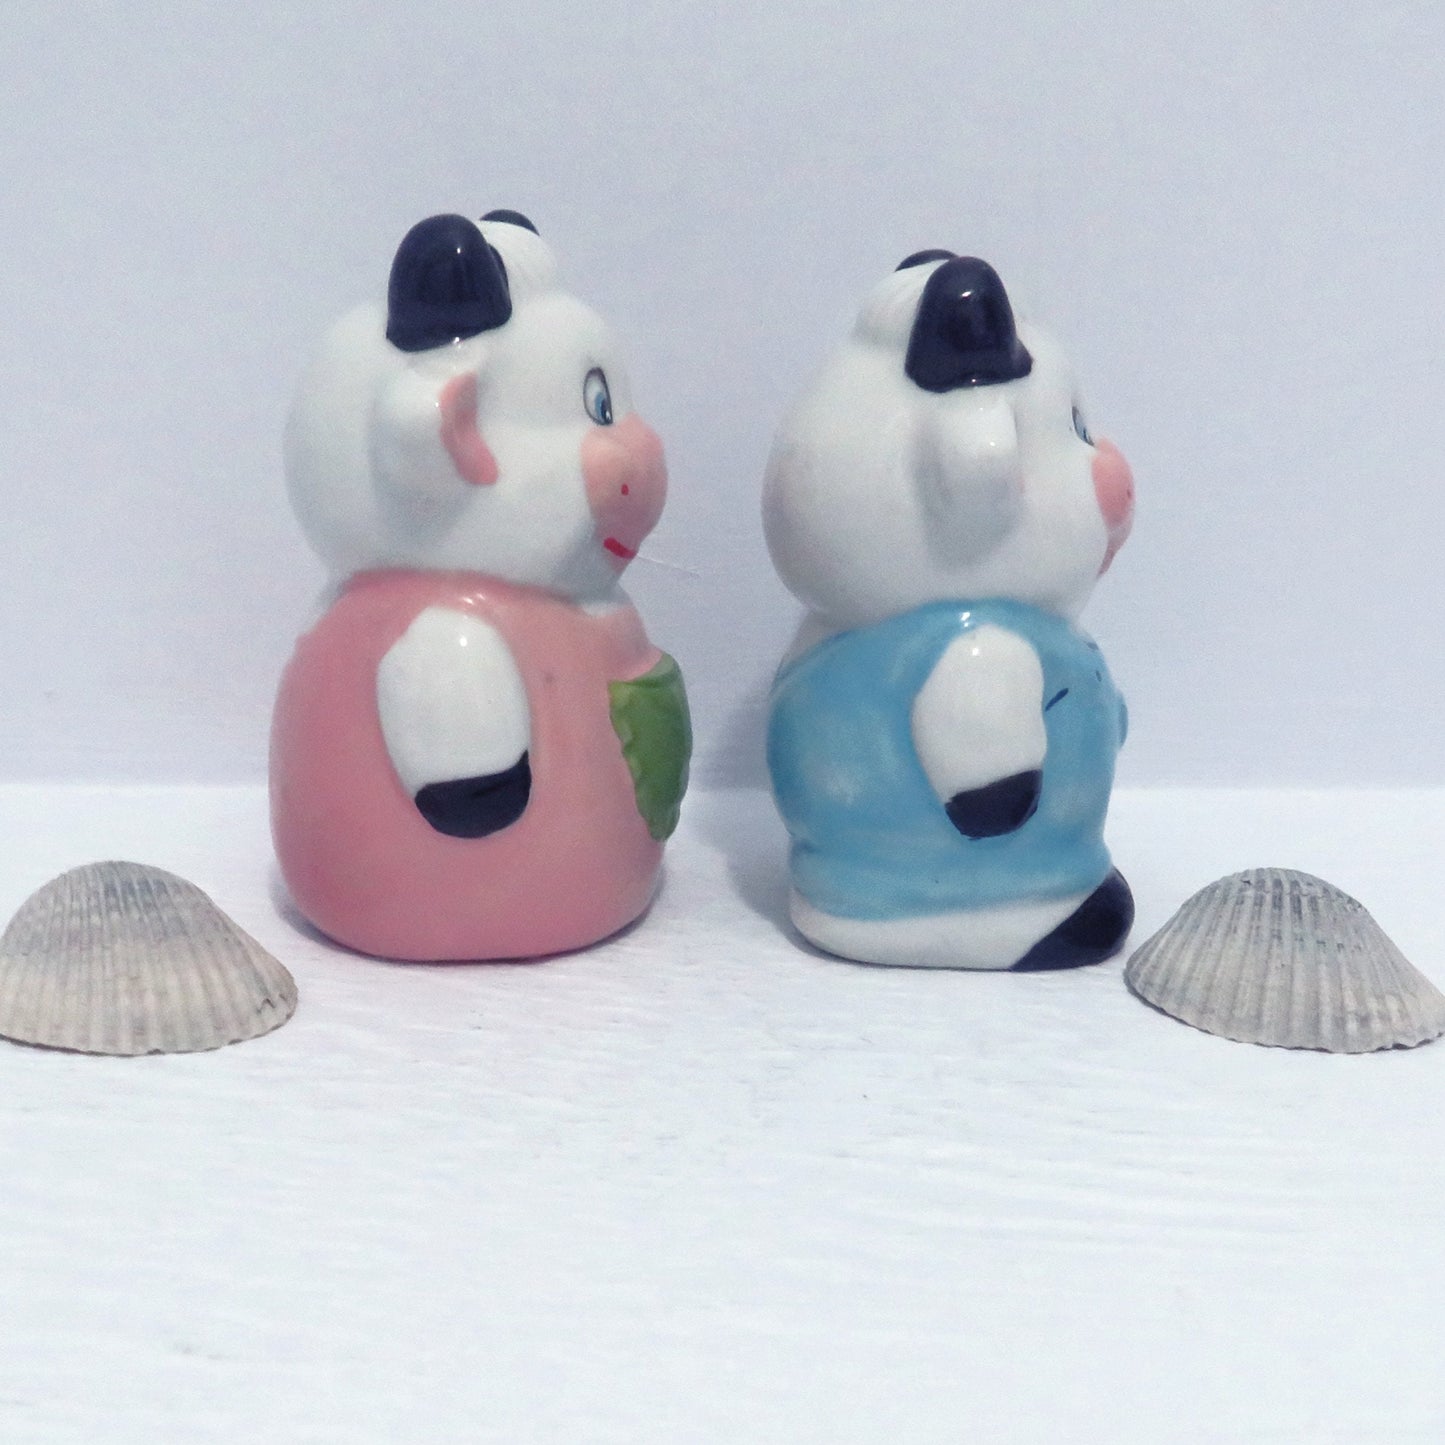 Vintage Ceramic Cow Salt and Pepper Shakers / Table Ware / Cow Decor / Cow Lover Gift